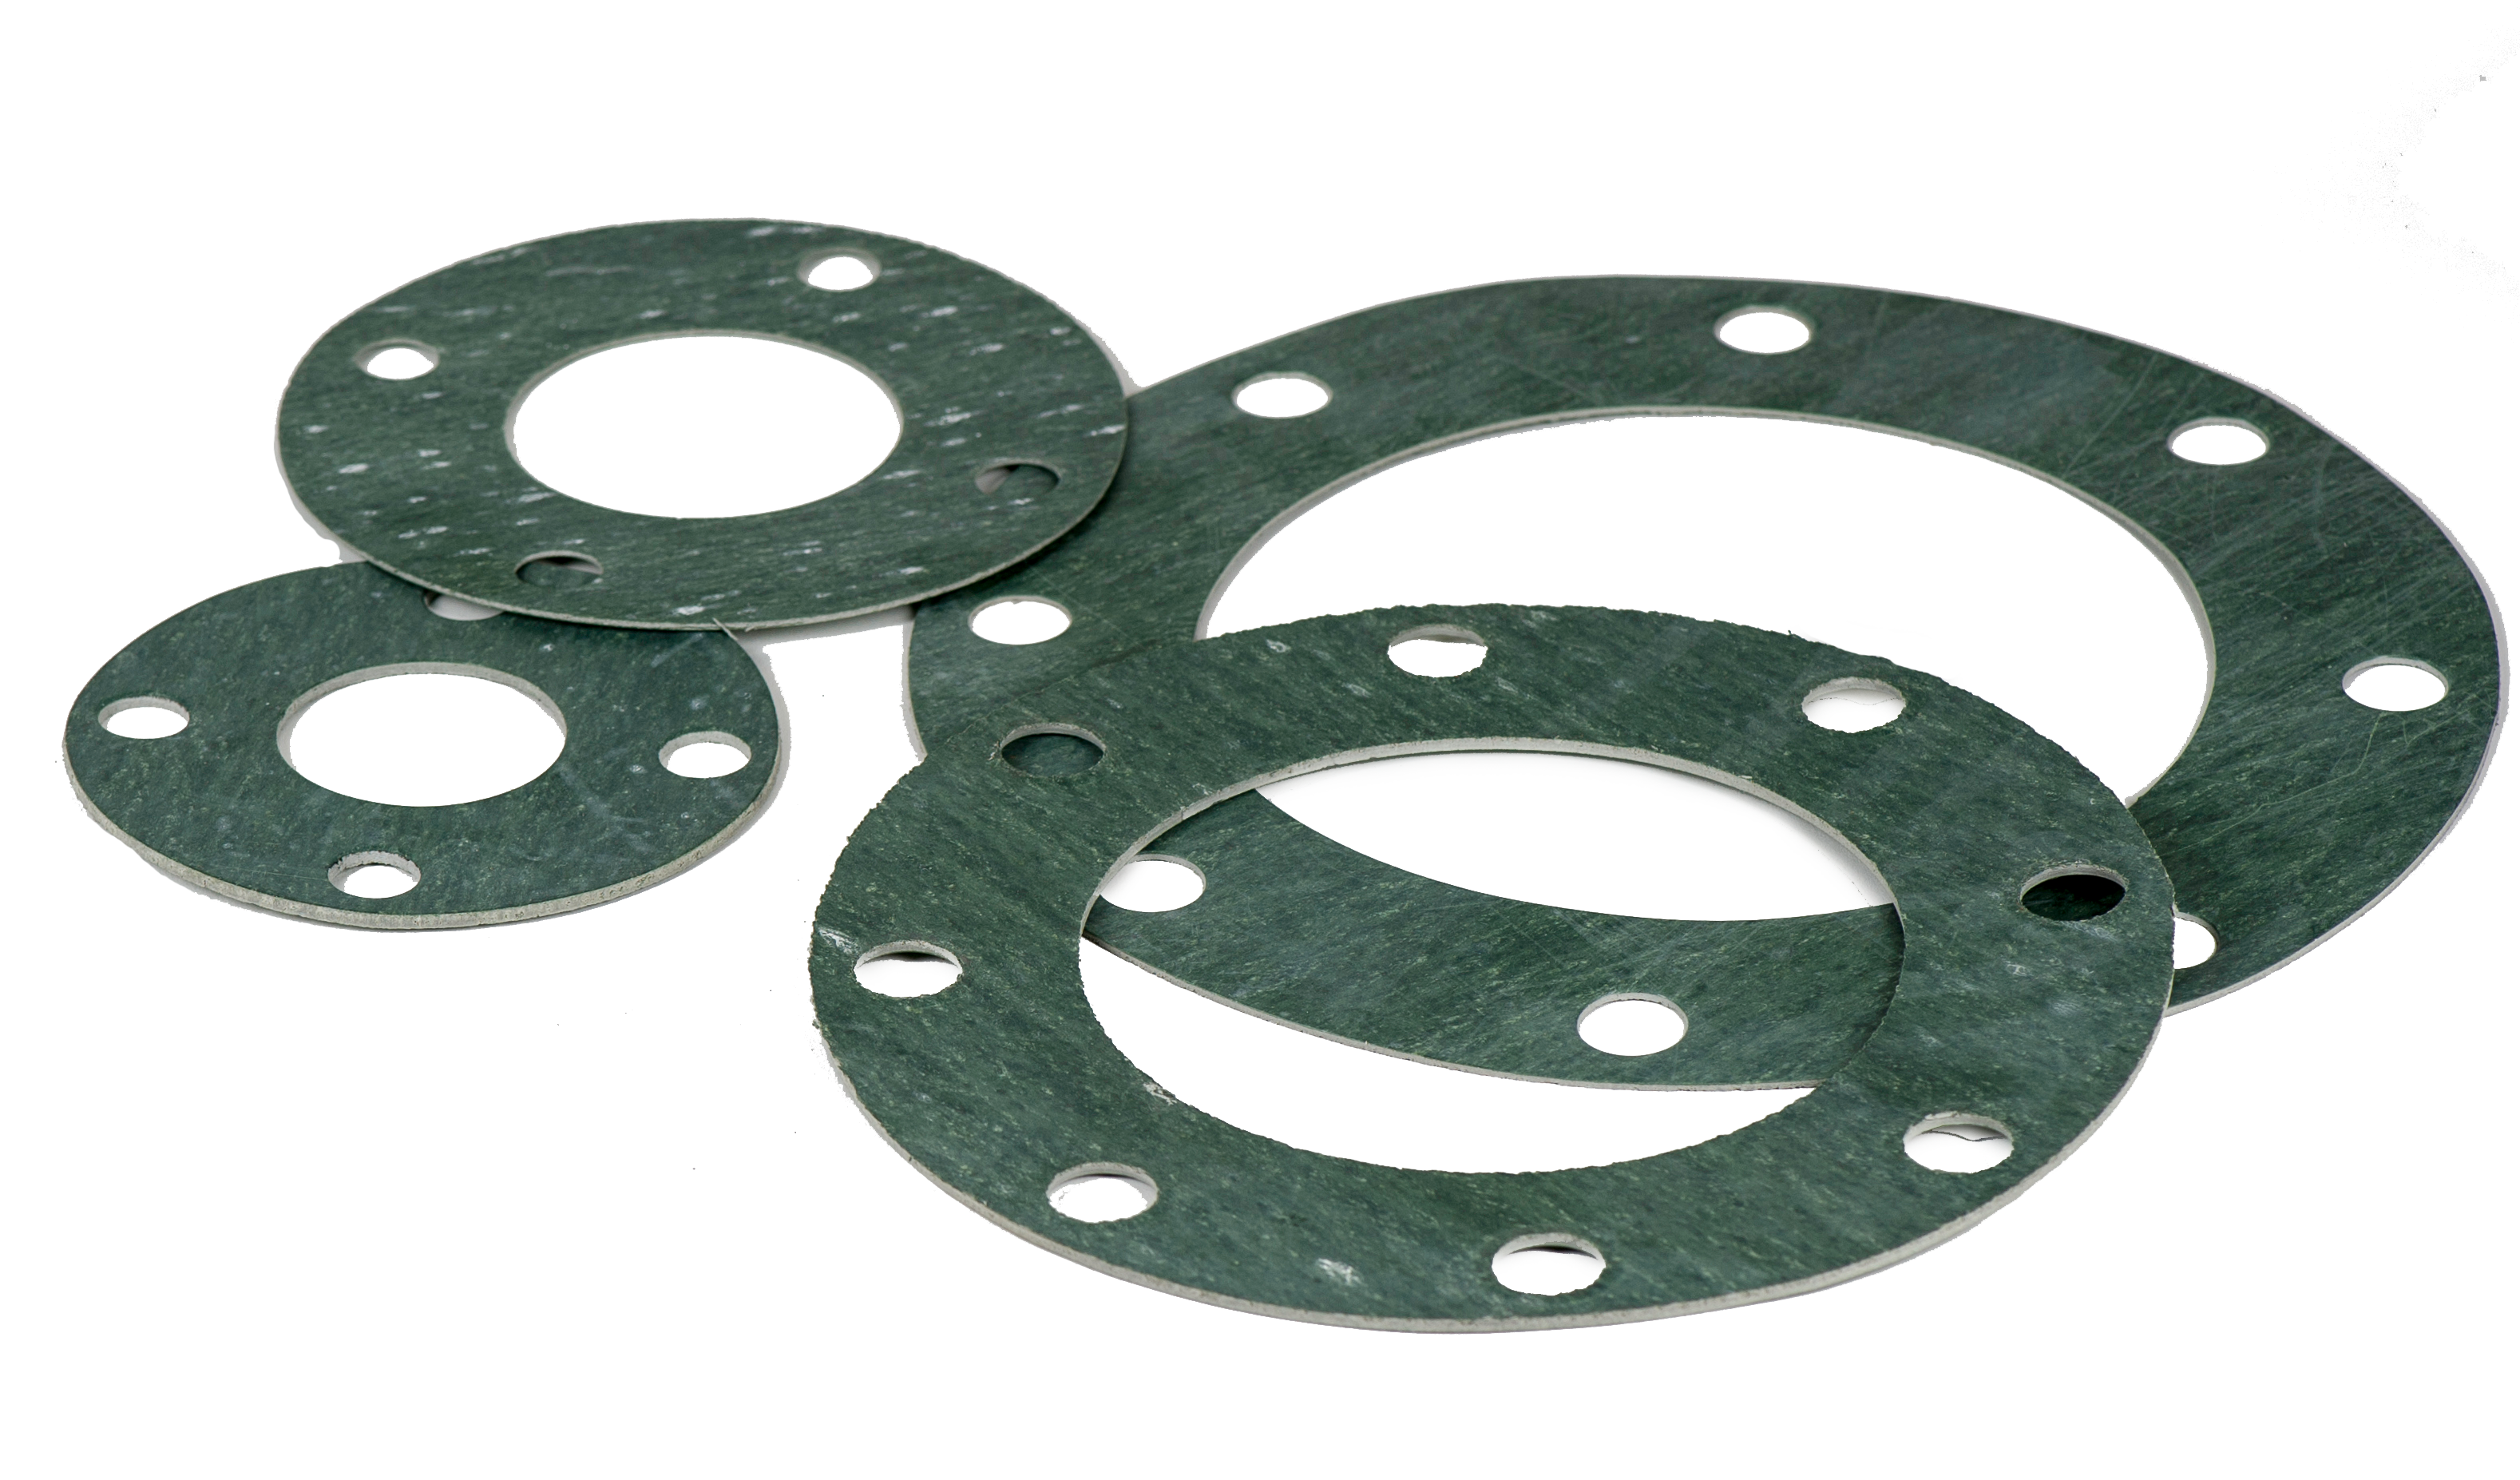 A pipe flange with many gaskets to prevent leakage